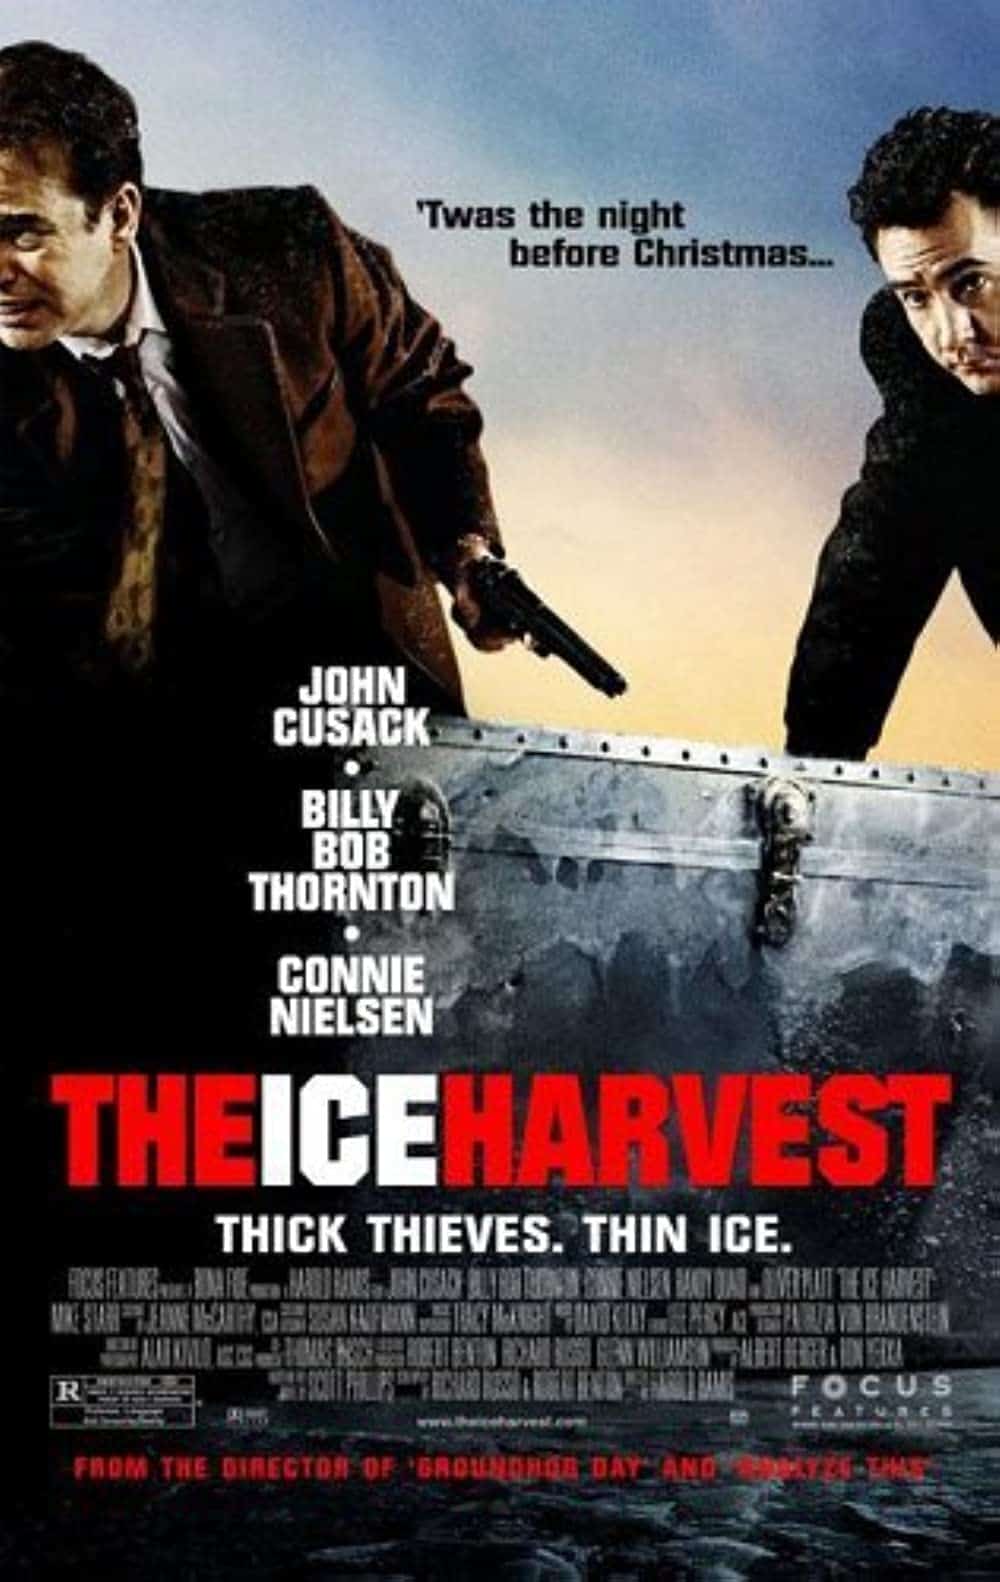 The Ice Harvest (2005) Best John Cusack Movies (Ranked)